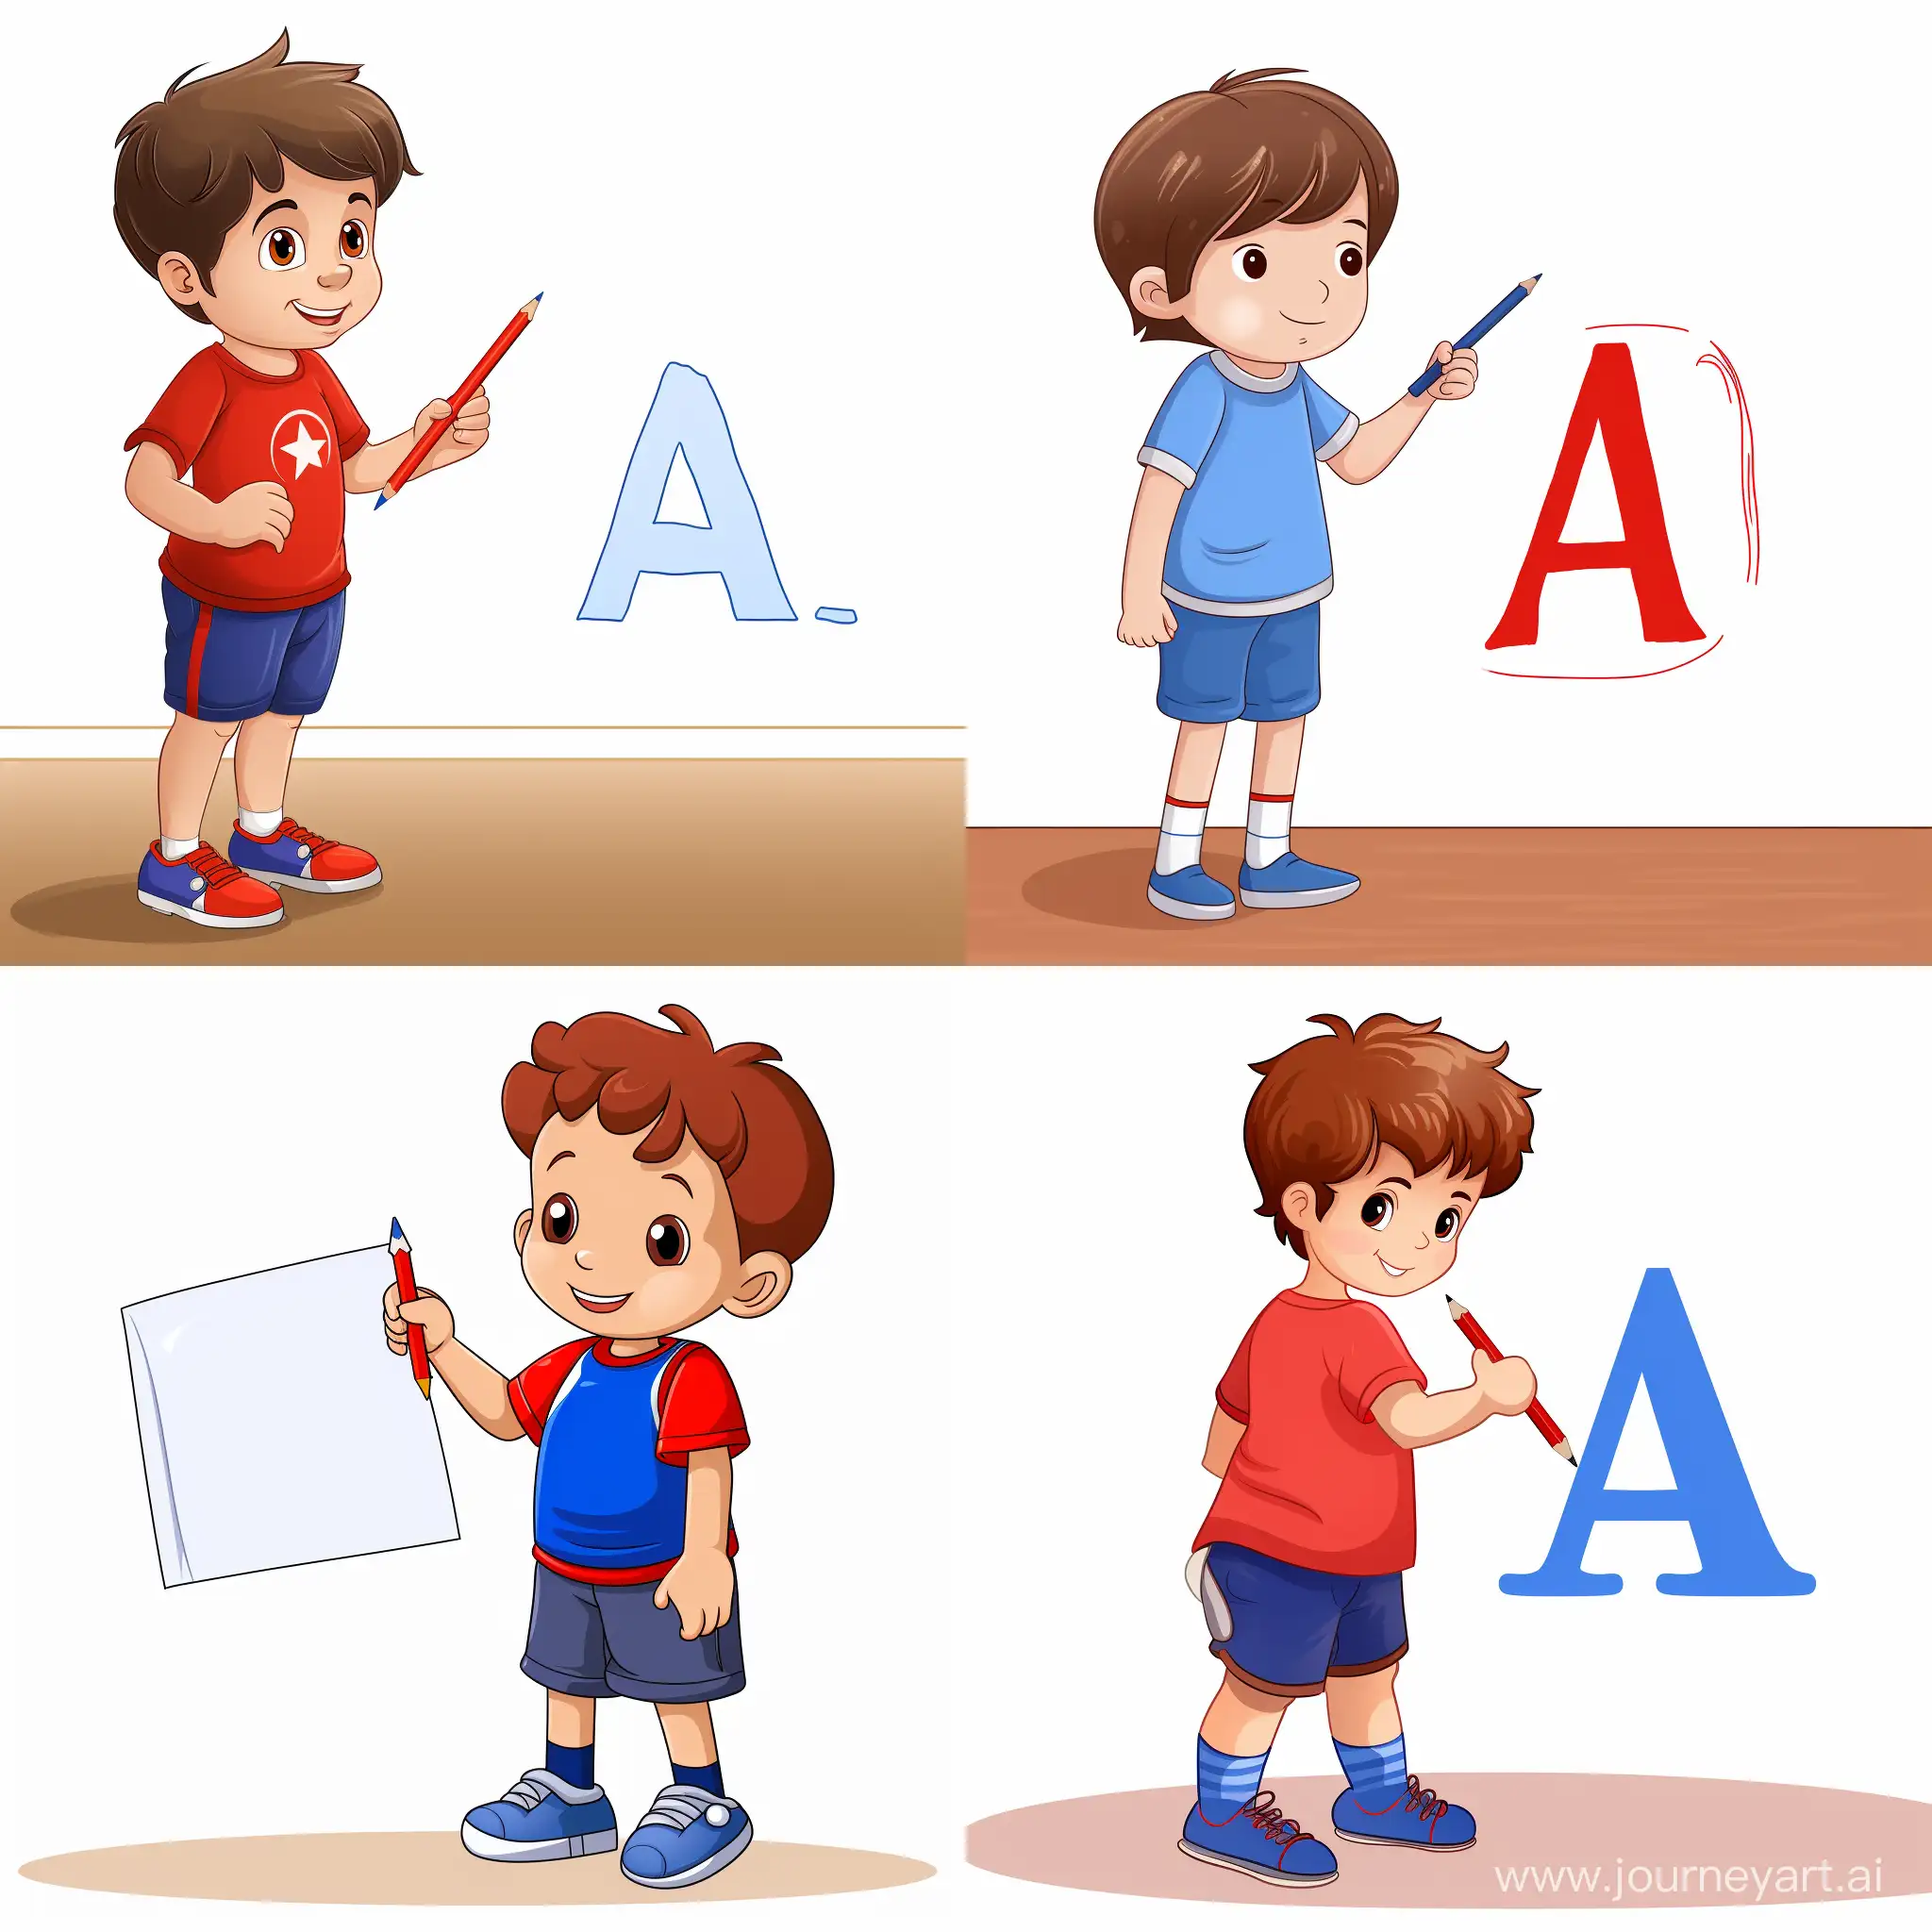 draw a cartoon toddler dressed in blue shorts and a red shirt holding a pencil and is tracing the letter A on a white sheet following dotted line